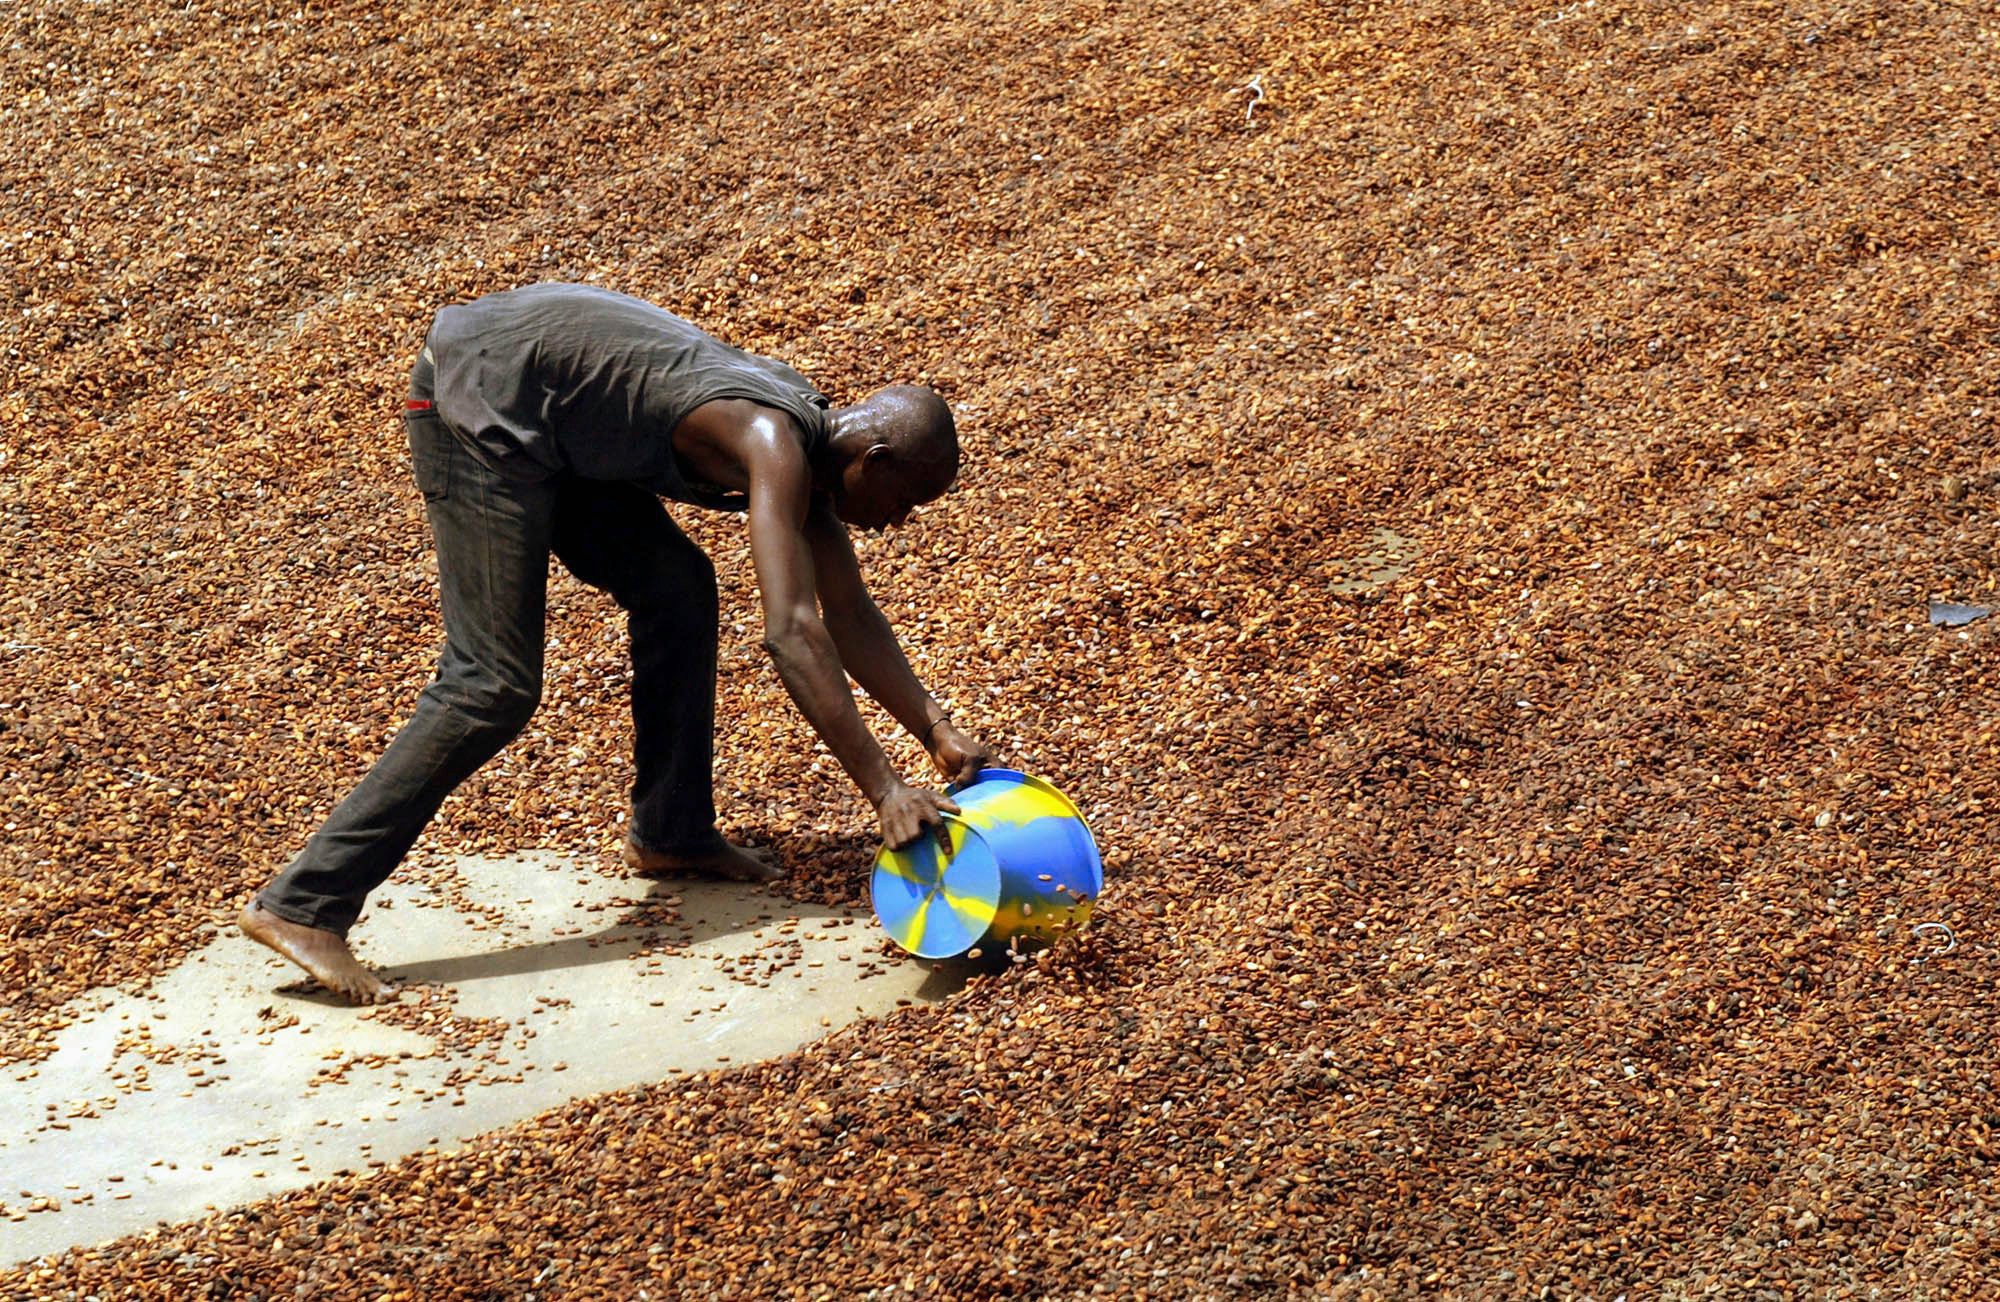 A worker shovels up cocoa beans after they have been dried in the sun, ready to be put into into sacks for export, in Guiglo in western Ivory Coast Tuesday, April 6, 2004. Competition over land to grow cocoa, the key ingredient in chocolate, is fueling a cycle of ethnic violence in Ivory Coast, the world's largest producer where 40 percent of global supply is harvested. (KEYSTONE/AP Photo/Ben Curtis) ELFENBEINKUESTE KAKAO PLANTAGE